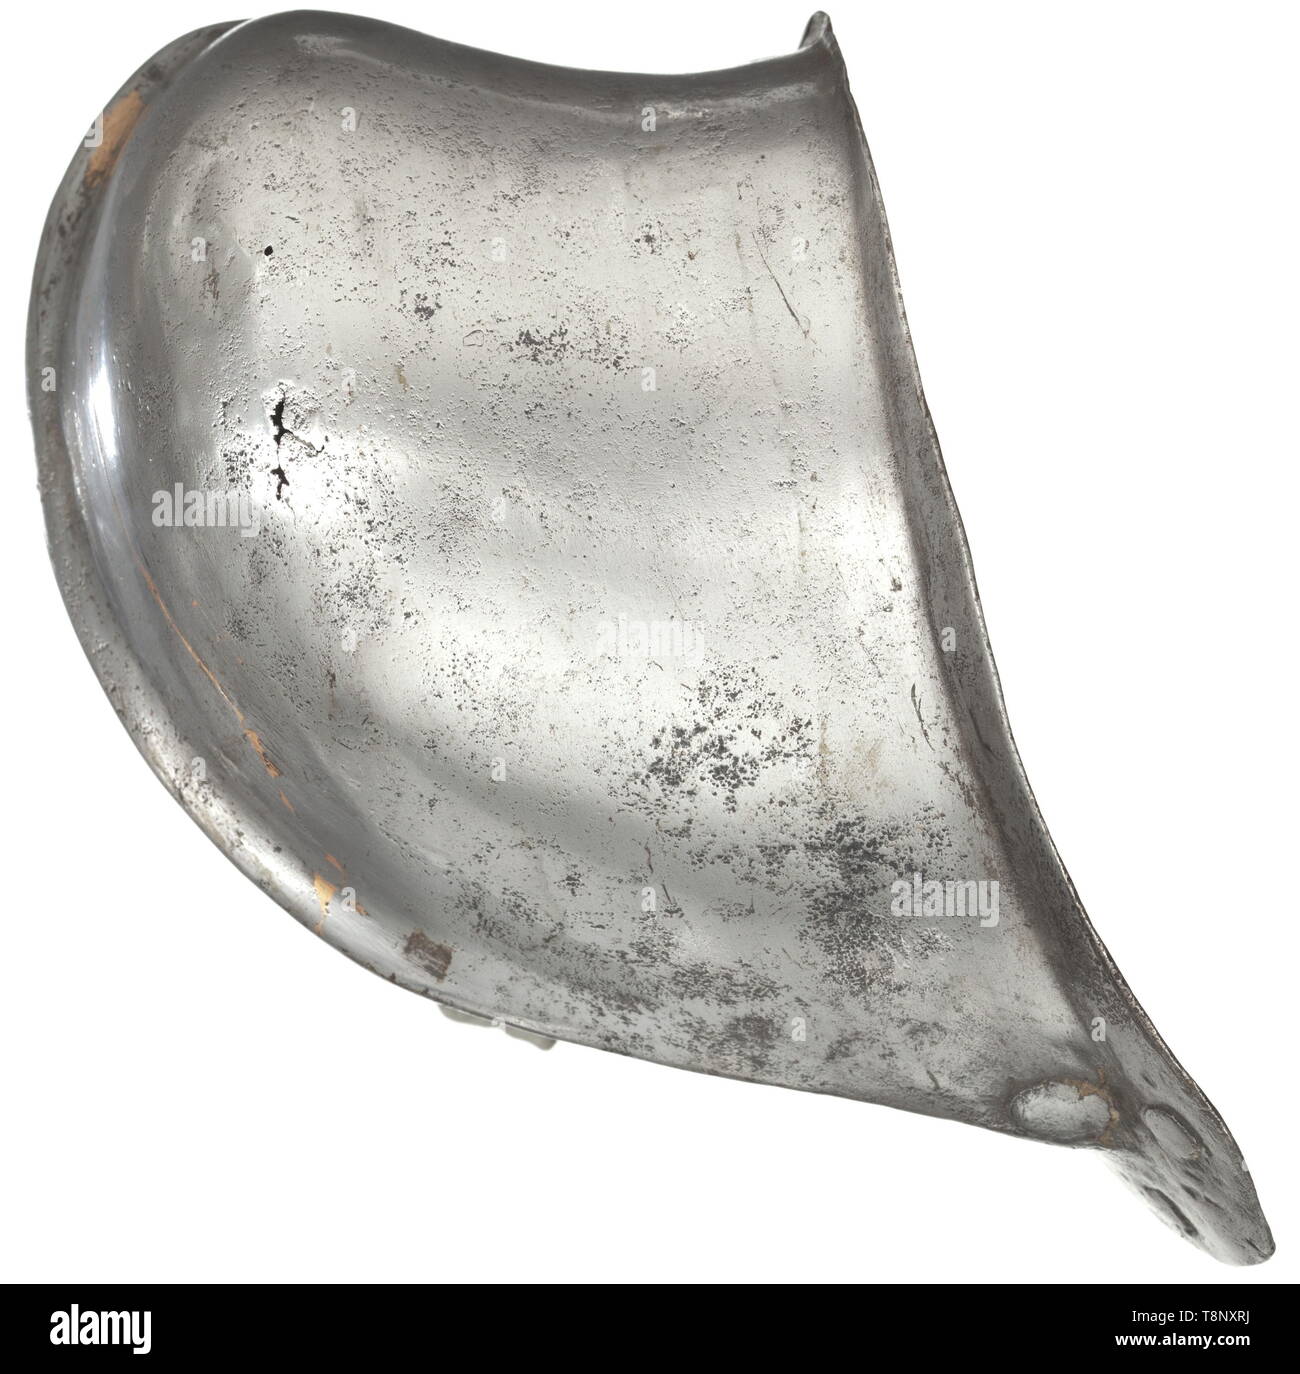 A German codpiece, circa 1560/70 One-piece, chased iron codpiece with raised central ridge and slightly flared rim. The top and bottom with two closed fastening holes each. Old copper solder repair, small corrosion holes at the side. Dimensions 14 cm. Rare piece of armour. Only few suits of armour have retained their original codpieces, as these parts were mostly removed in museums and private collections during the prudish 19th century. historic, historical, defensive arms, weapons, arms, weapon, arm, fighting device, object, objects, stills, cl, Additional-Rights-Clearance-Info-Not-Available Stock Photo